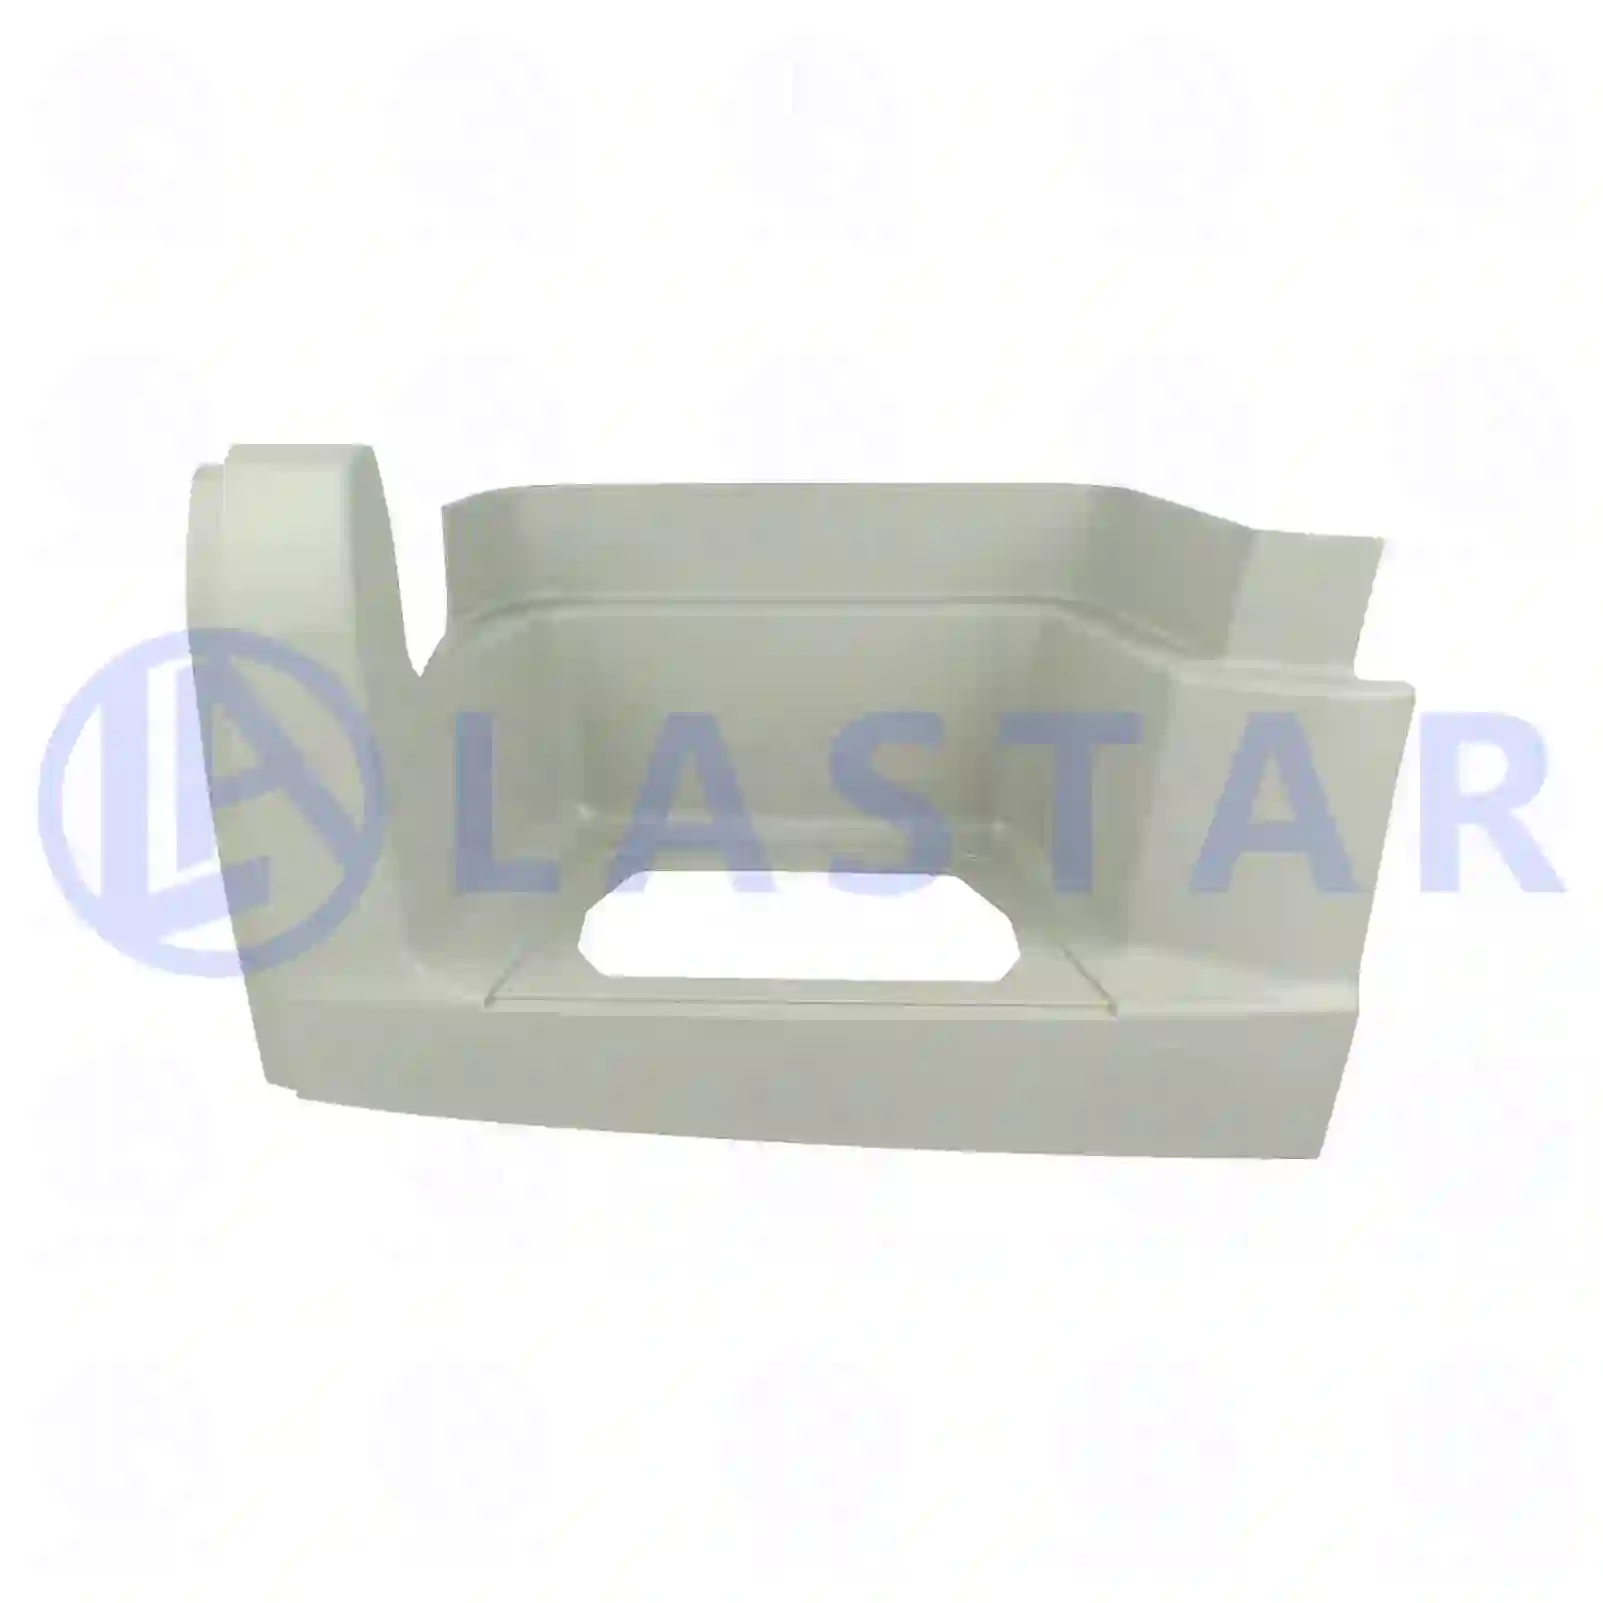 Step well case, left, 77719747, 1364798, 1695228, ZG61189-0008 ||  77719747 Lastar Spare Part | Truck Spare Parts, Auotomotive Spare Parts Step well case, left, 77719747, 1364798, 1695228, ZG61189-0008 ||  77719747 Lastar Spare Part | Truck Spare Parts, Auotomotive Spare Parts